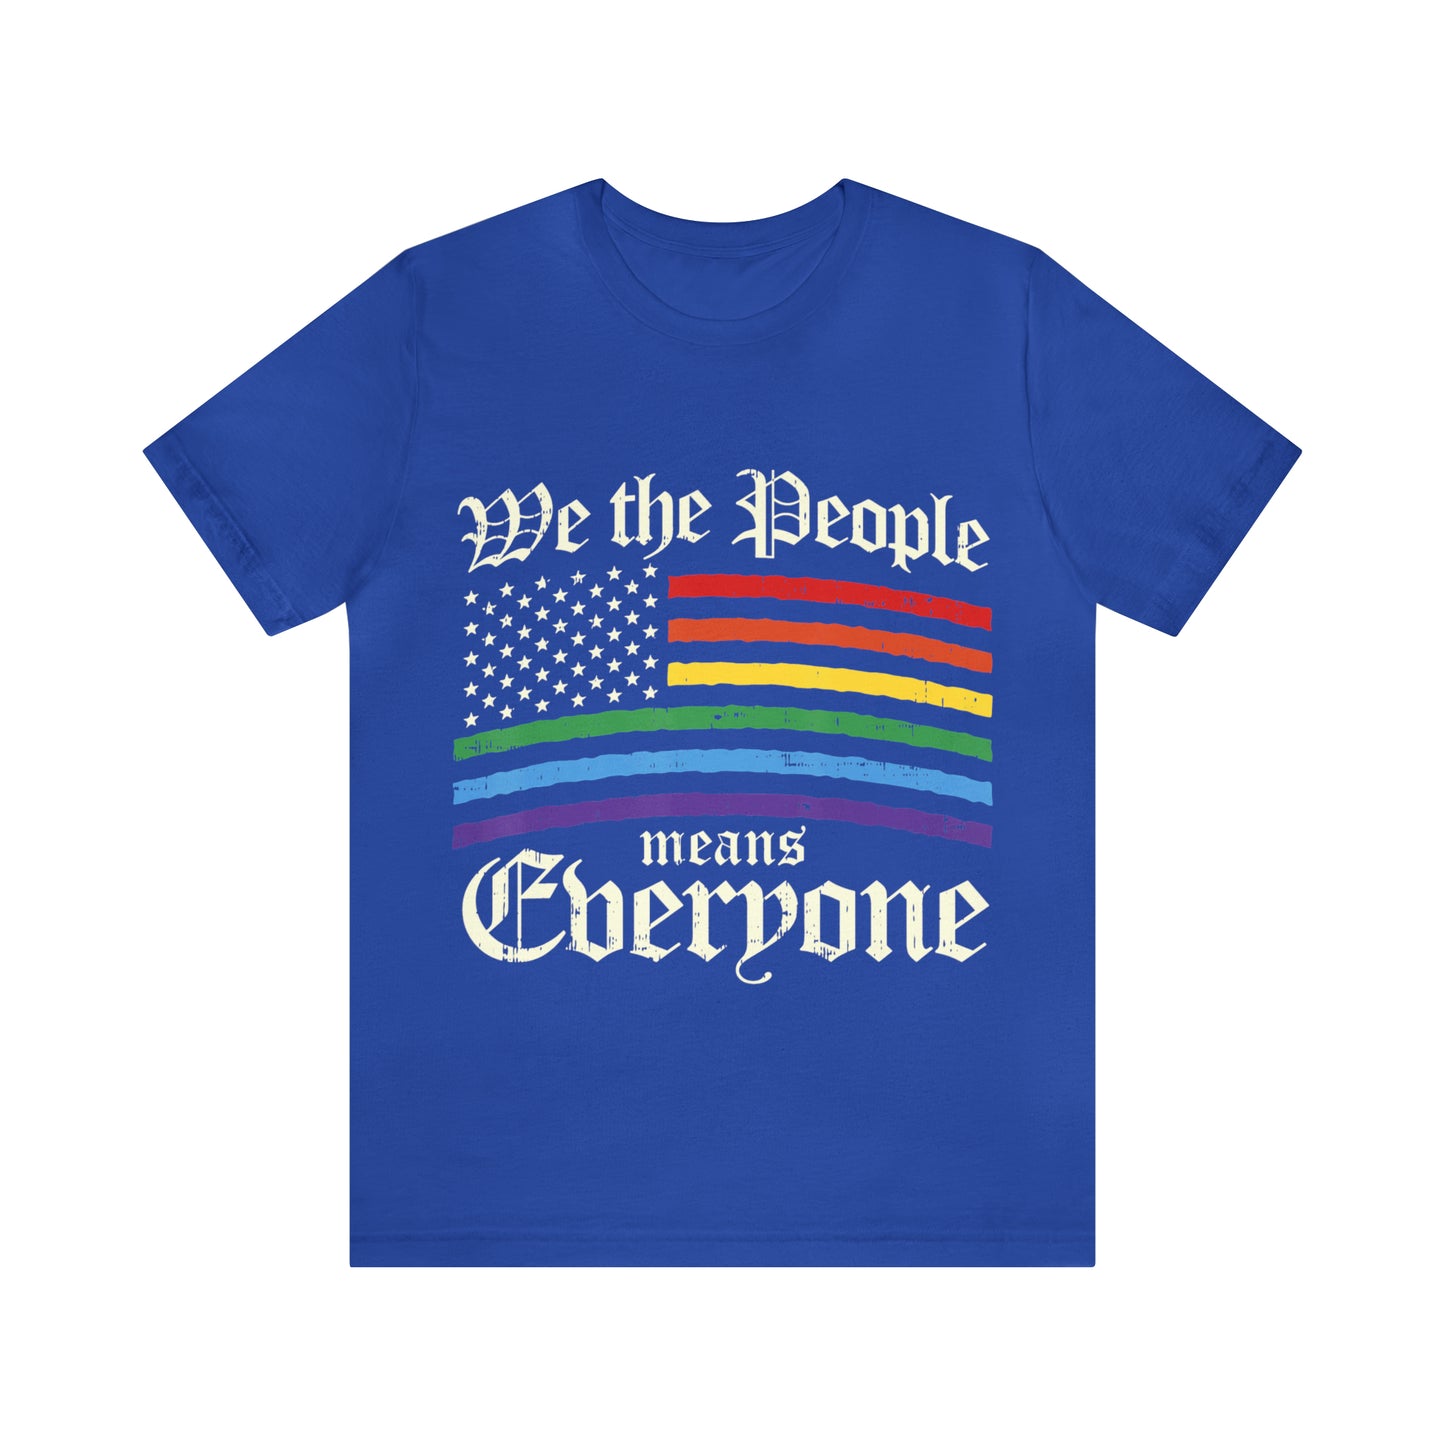 We The People Means Everyone - Unisex T-Shirt